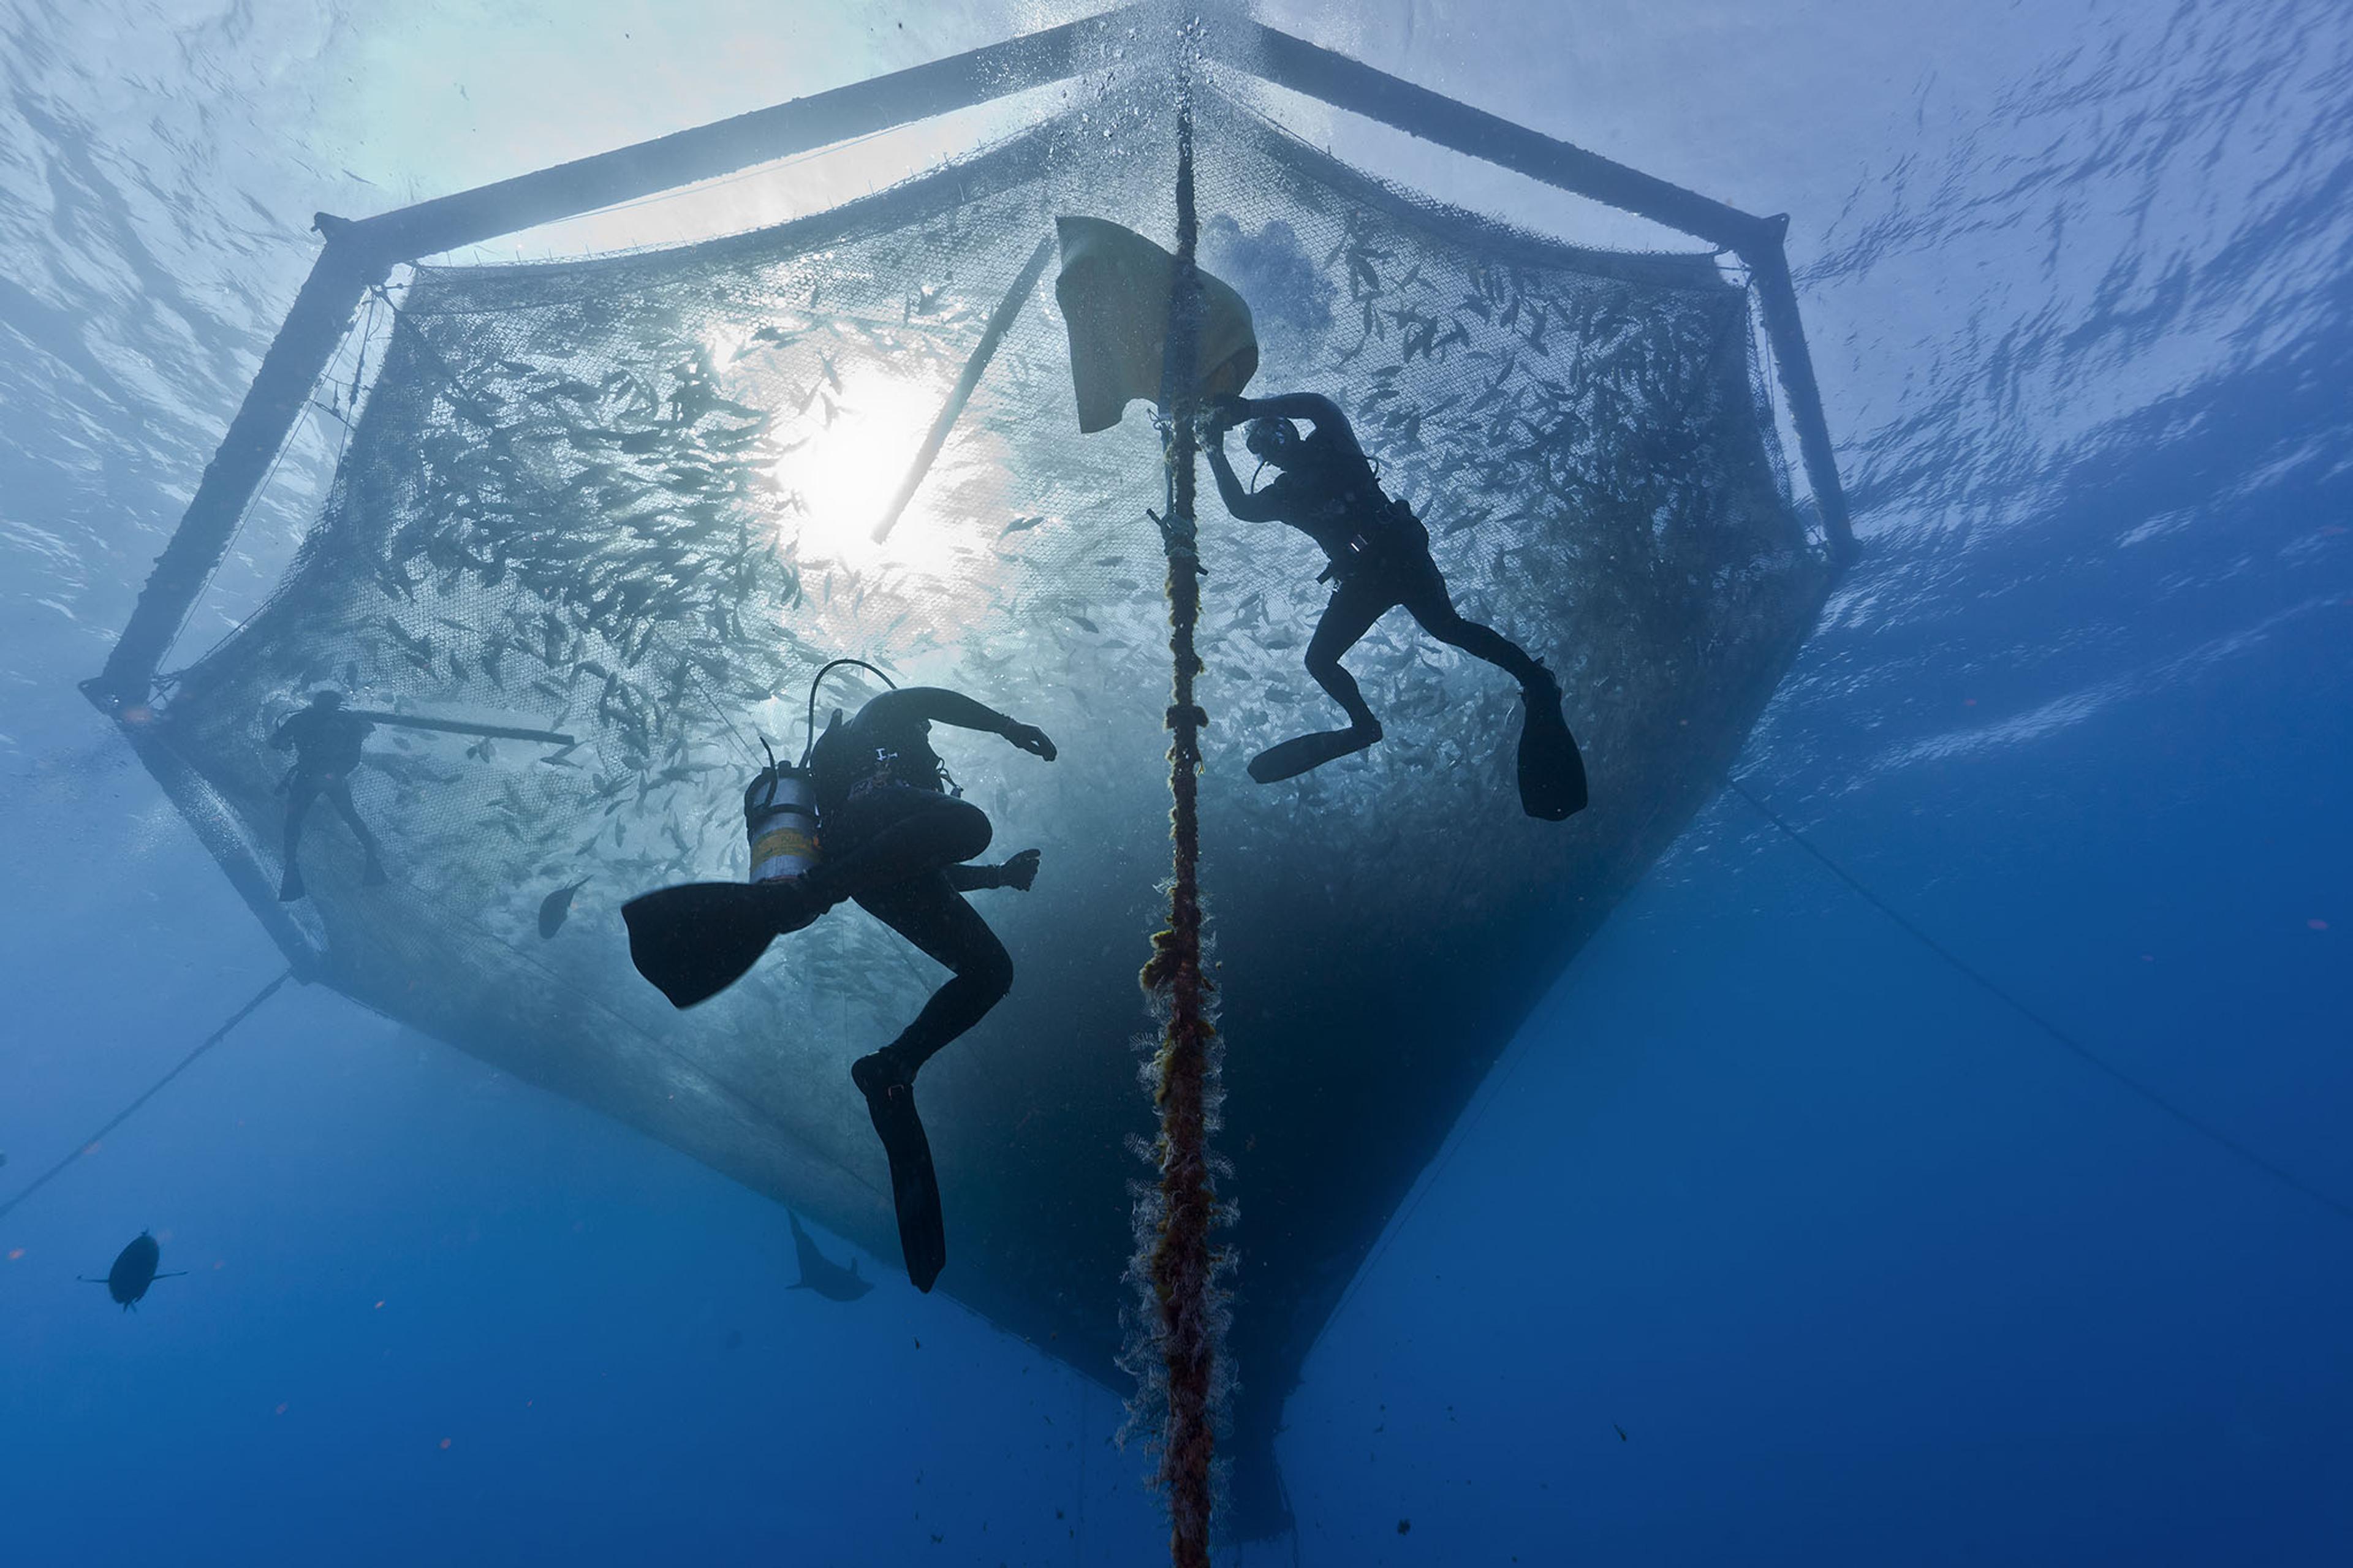 Divers in the ocean below a net filled with fish.